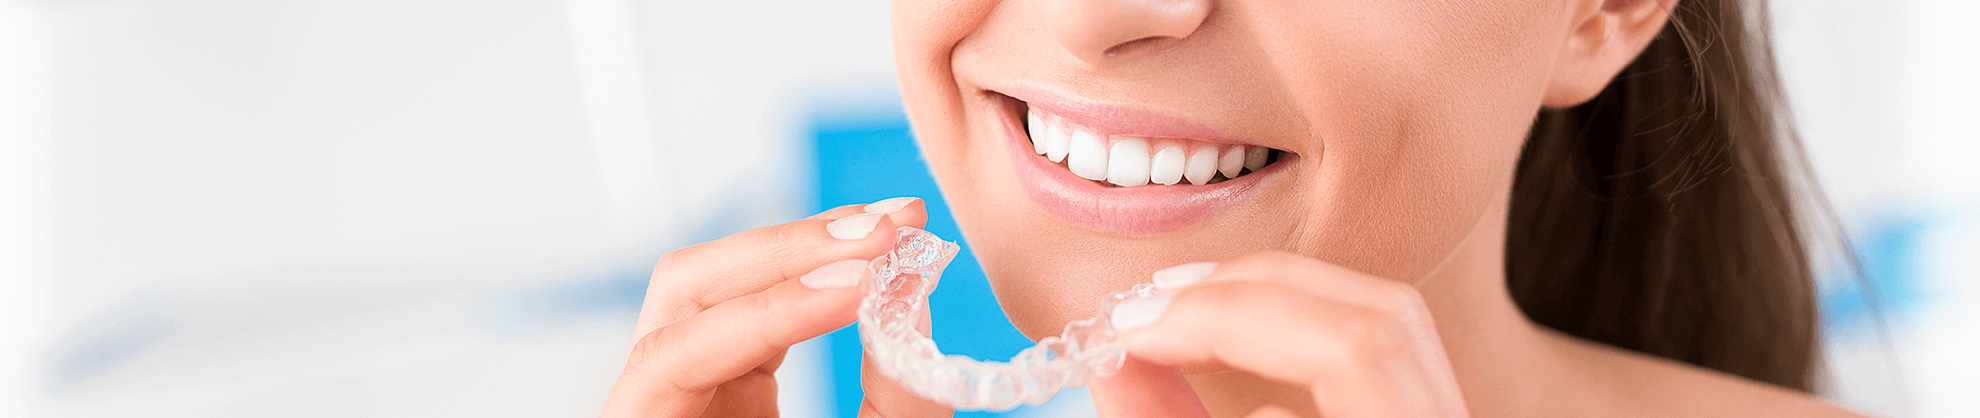 Invisible Braces for Crooked Teeth In Wichita KS